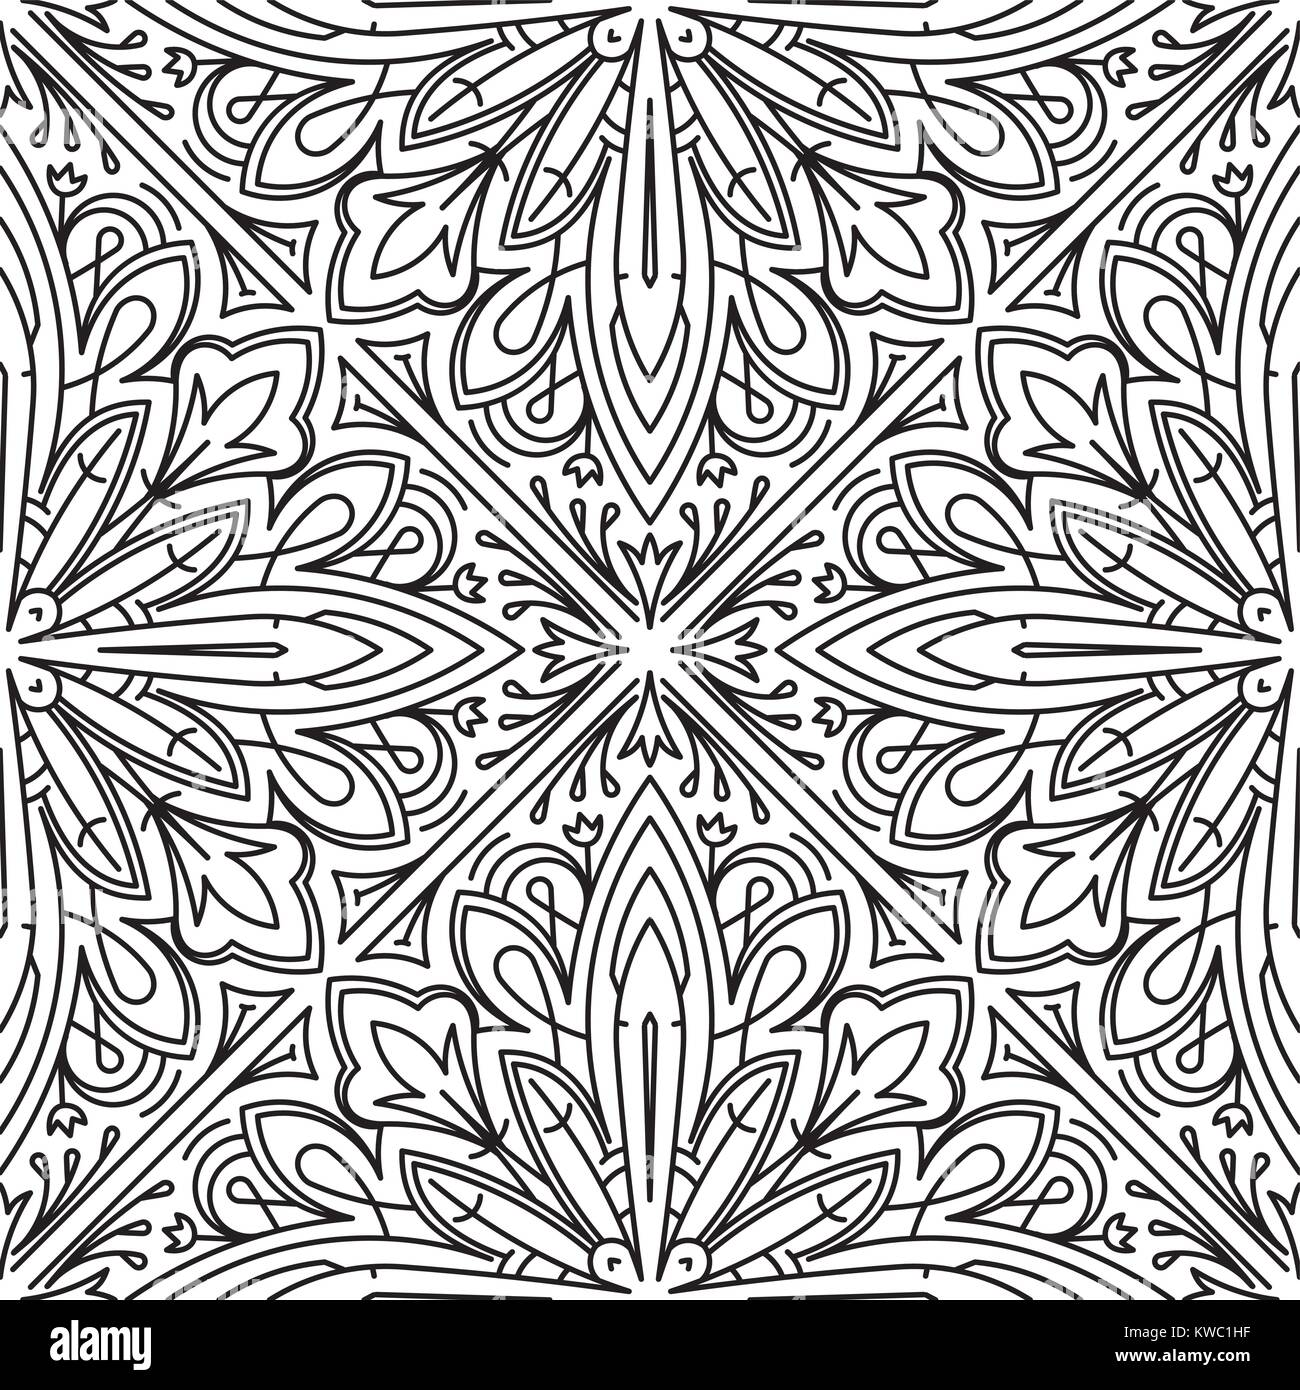 Seamless Abstract Tribal Black White Pattern Hand Drawn